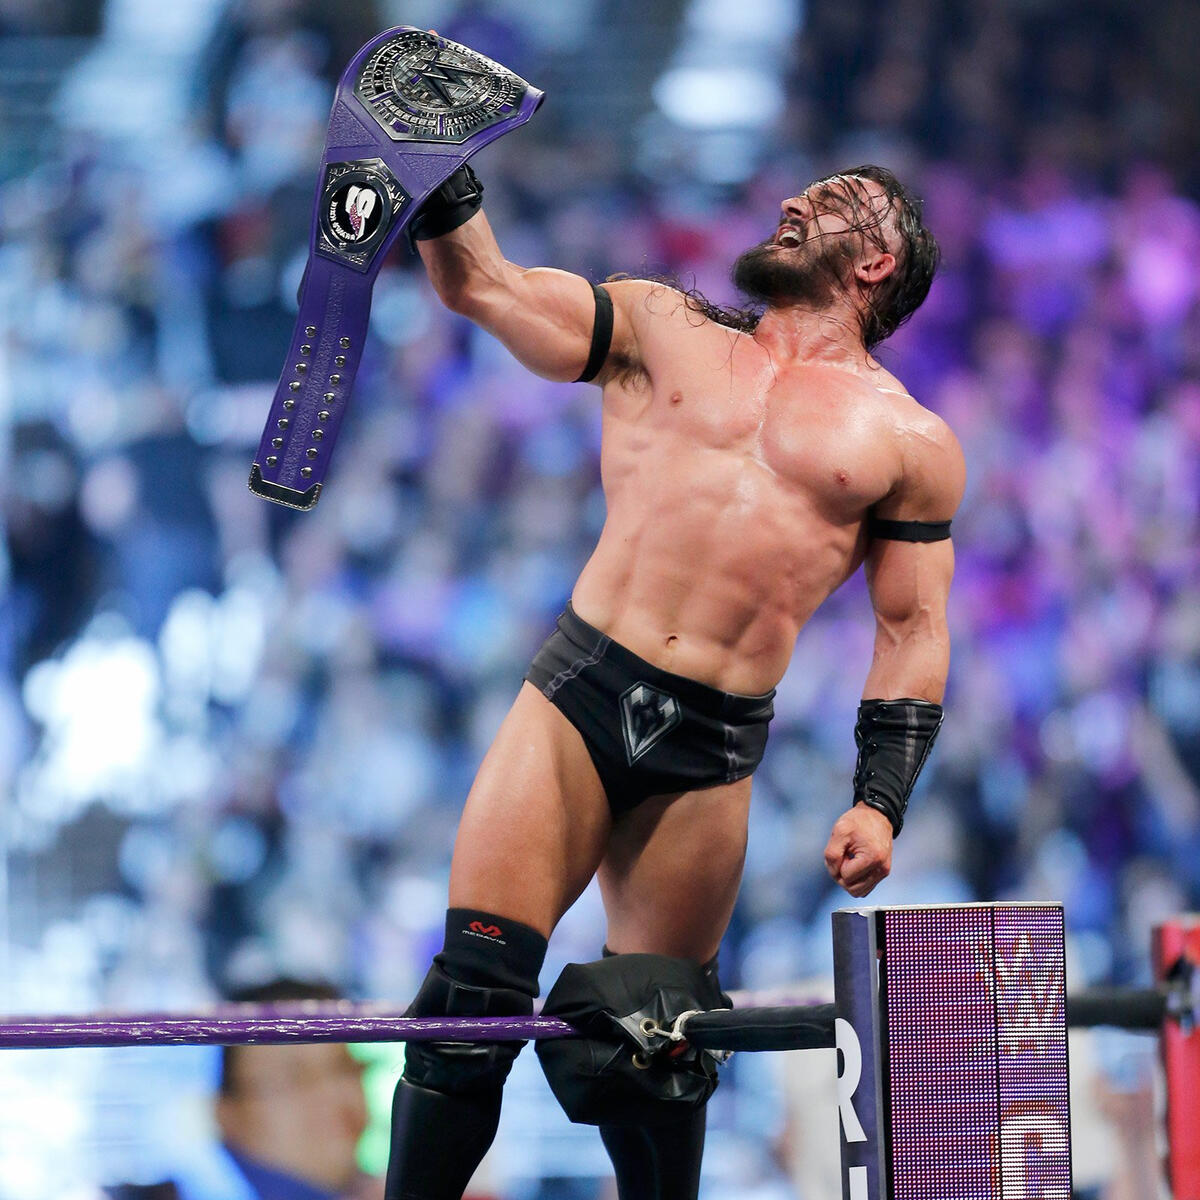 Forcing Swann to tap out, Neville officially becomes King of the Cruiserweights by capturing the Cruiserweight Championship.